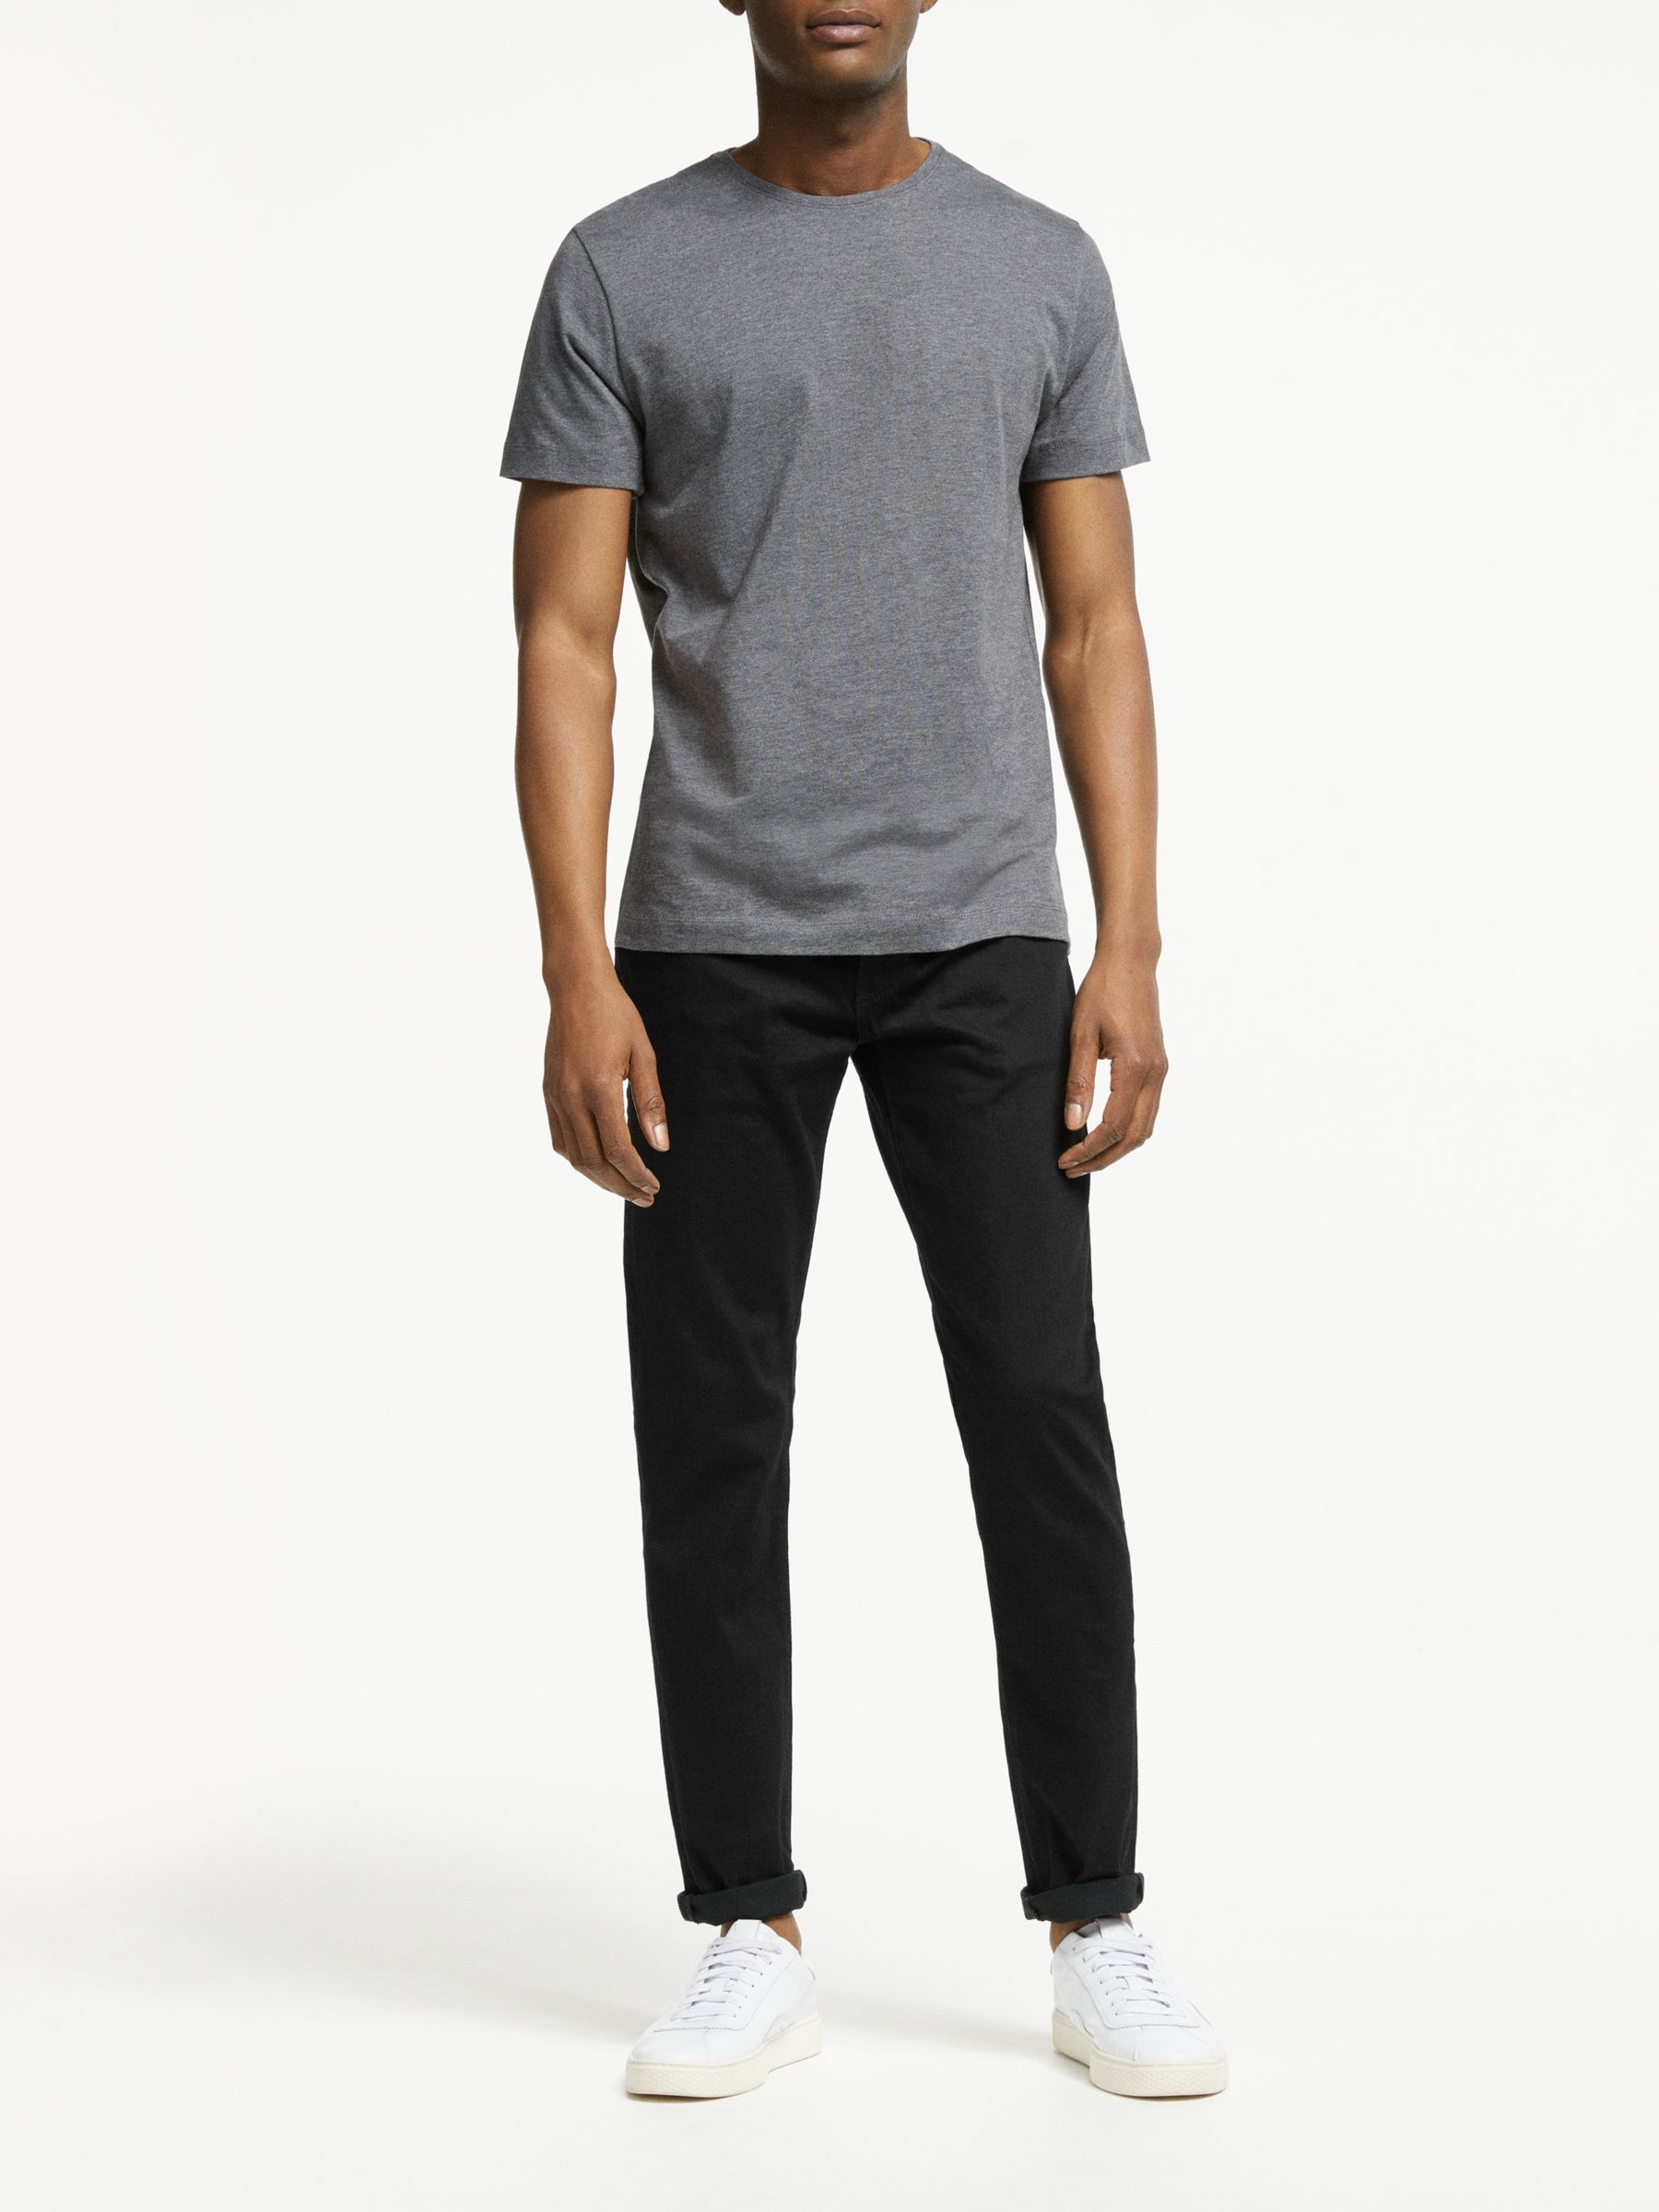 Levis 512 STRONG Slim Tapered Mens Jeans - Rock Cod - Jeans and